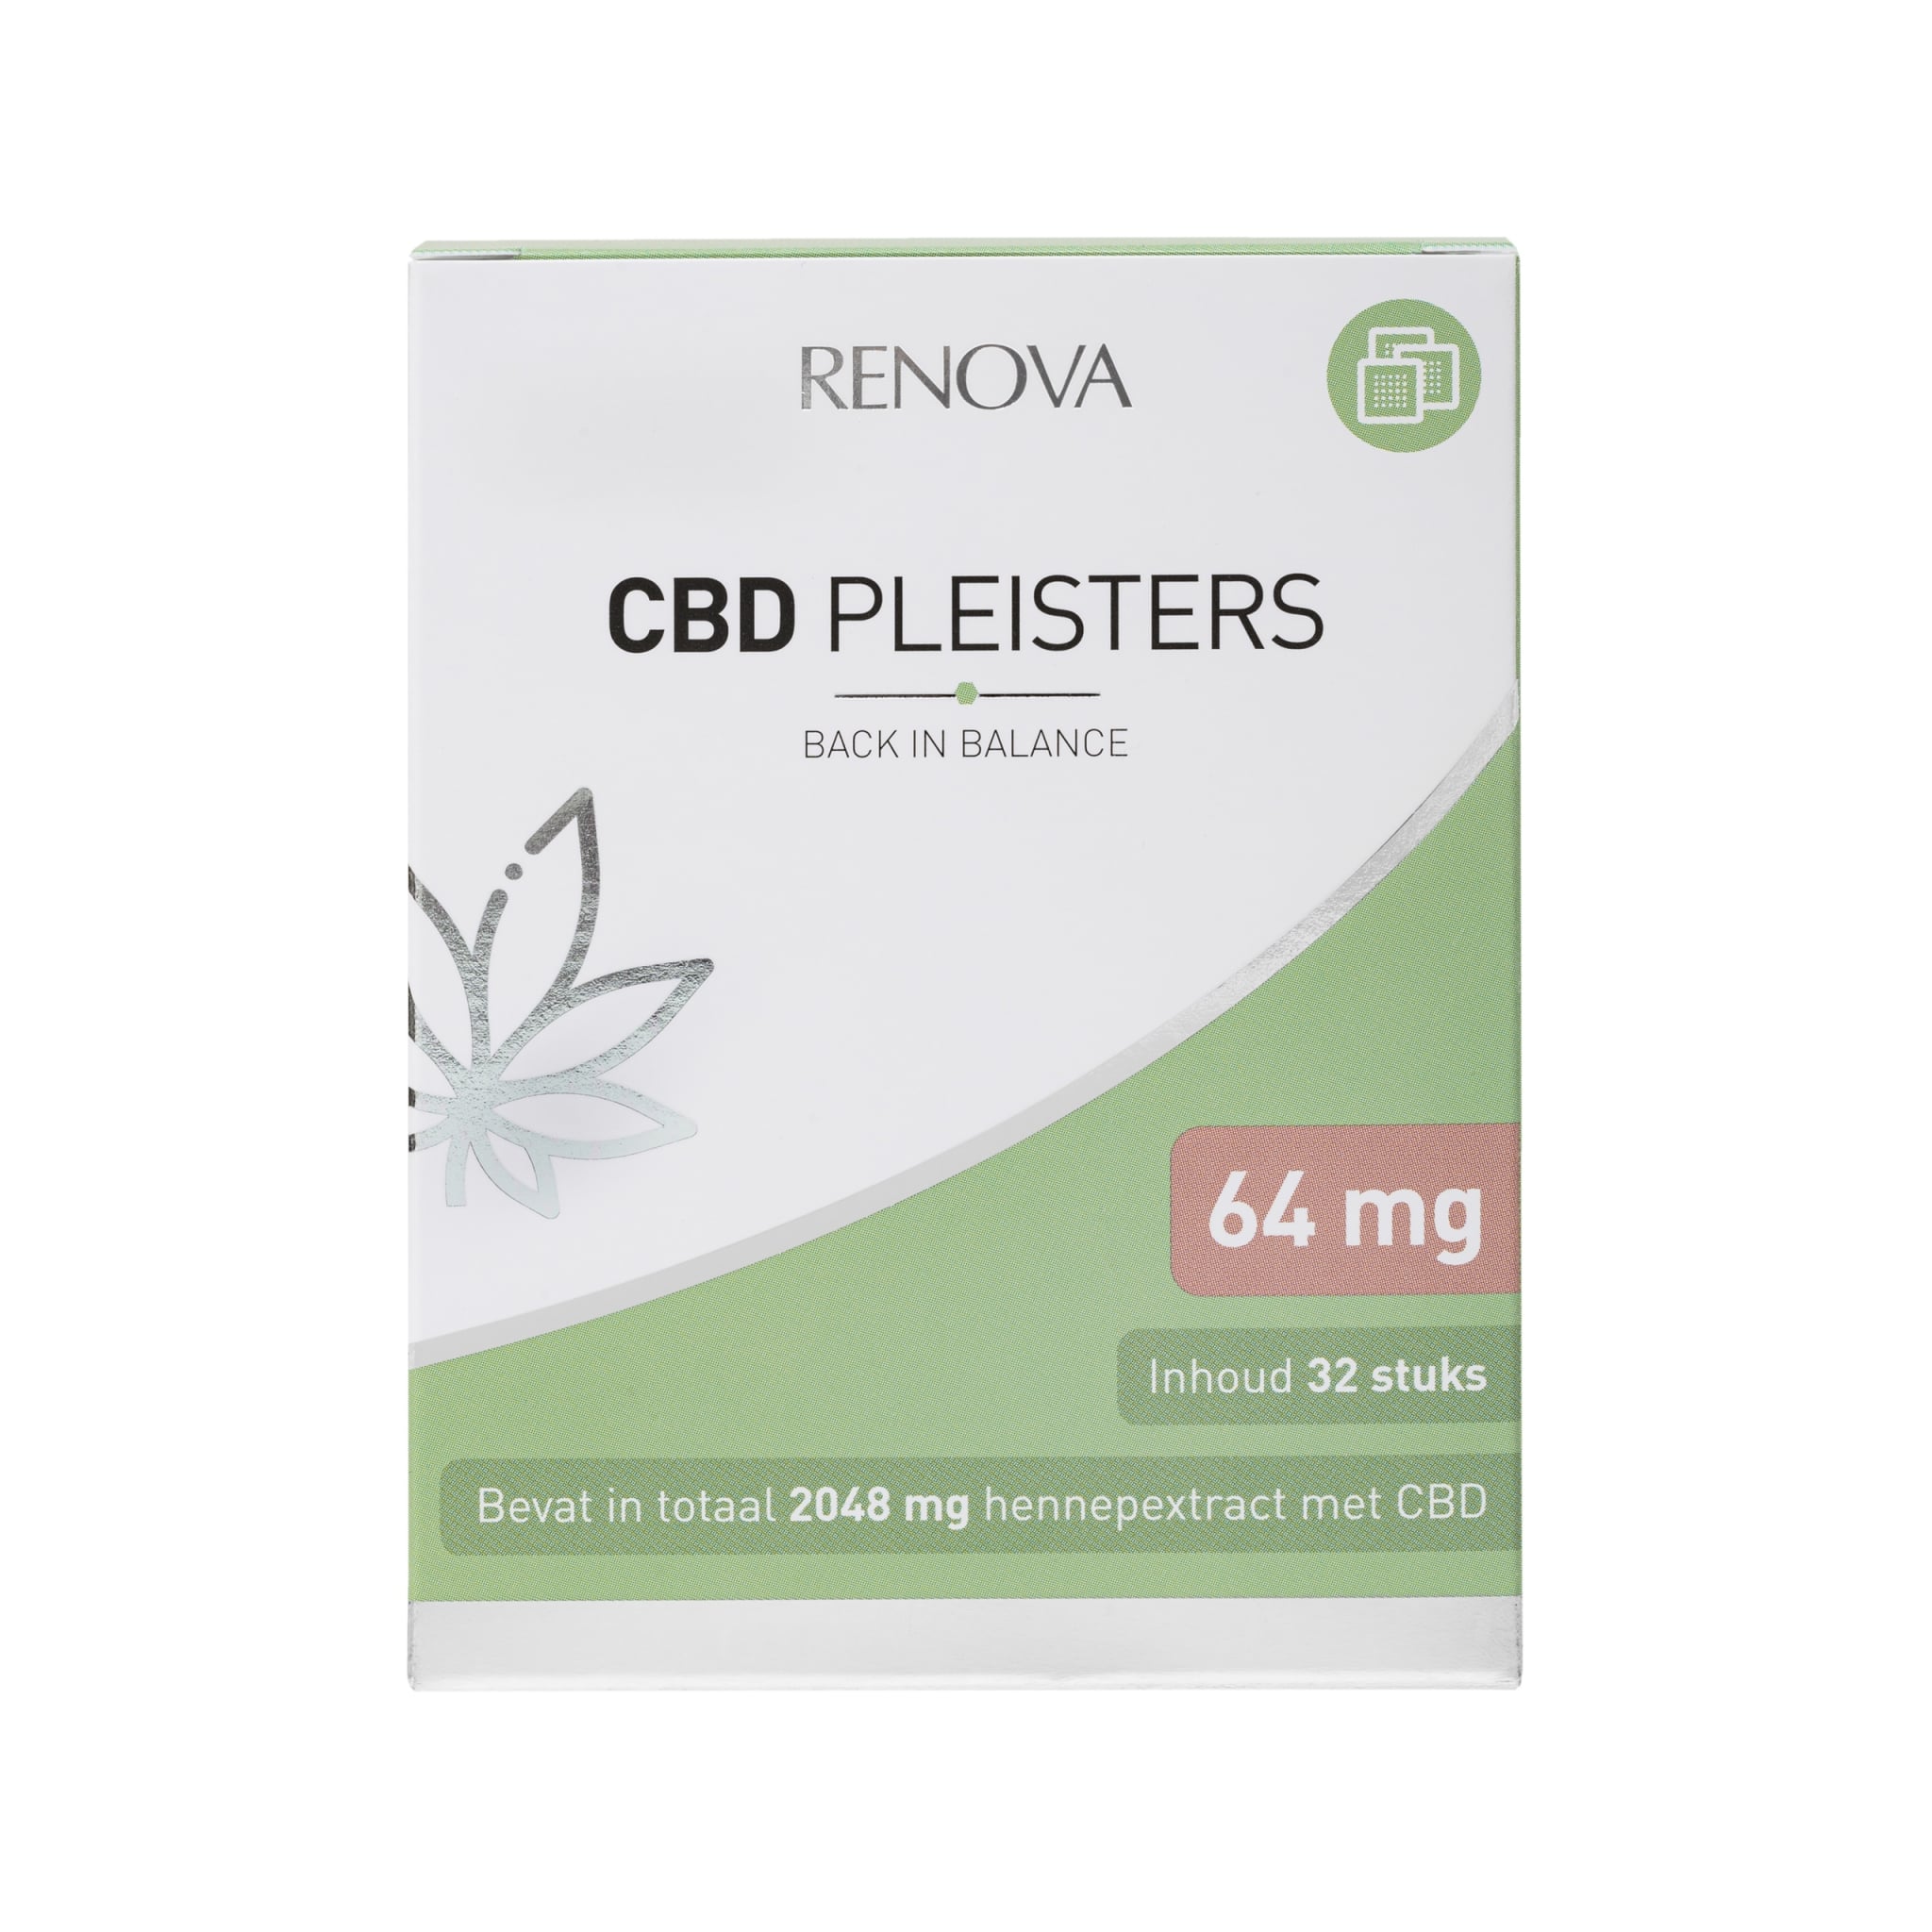 A packet of Renova CBD patches (64 mg - 32 pieces) resting on a white table.